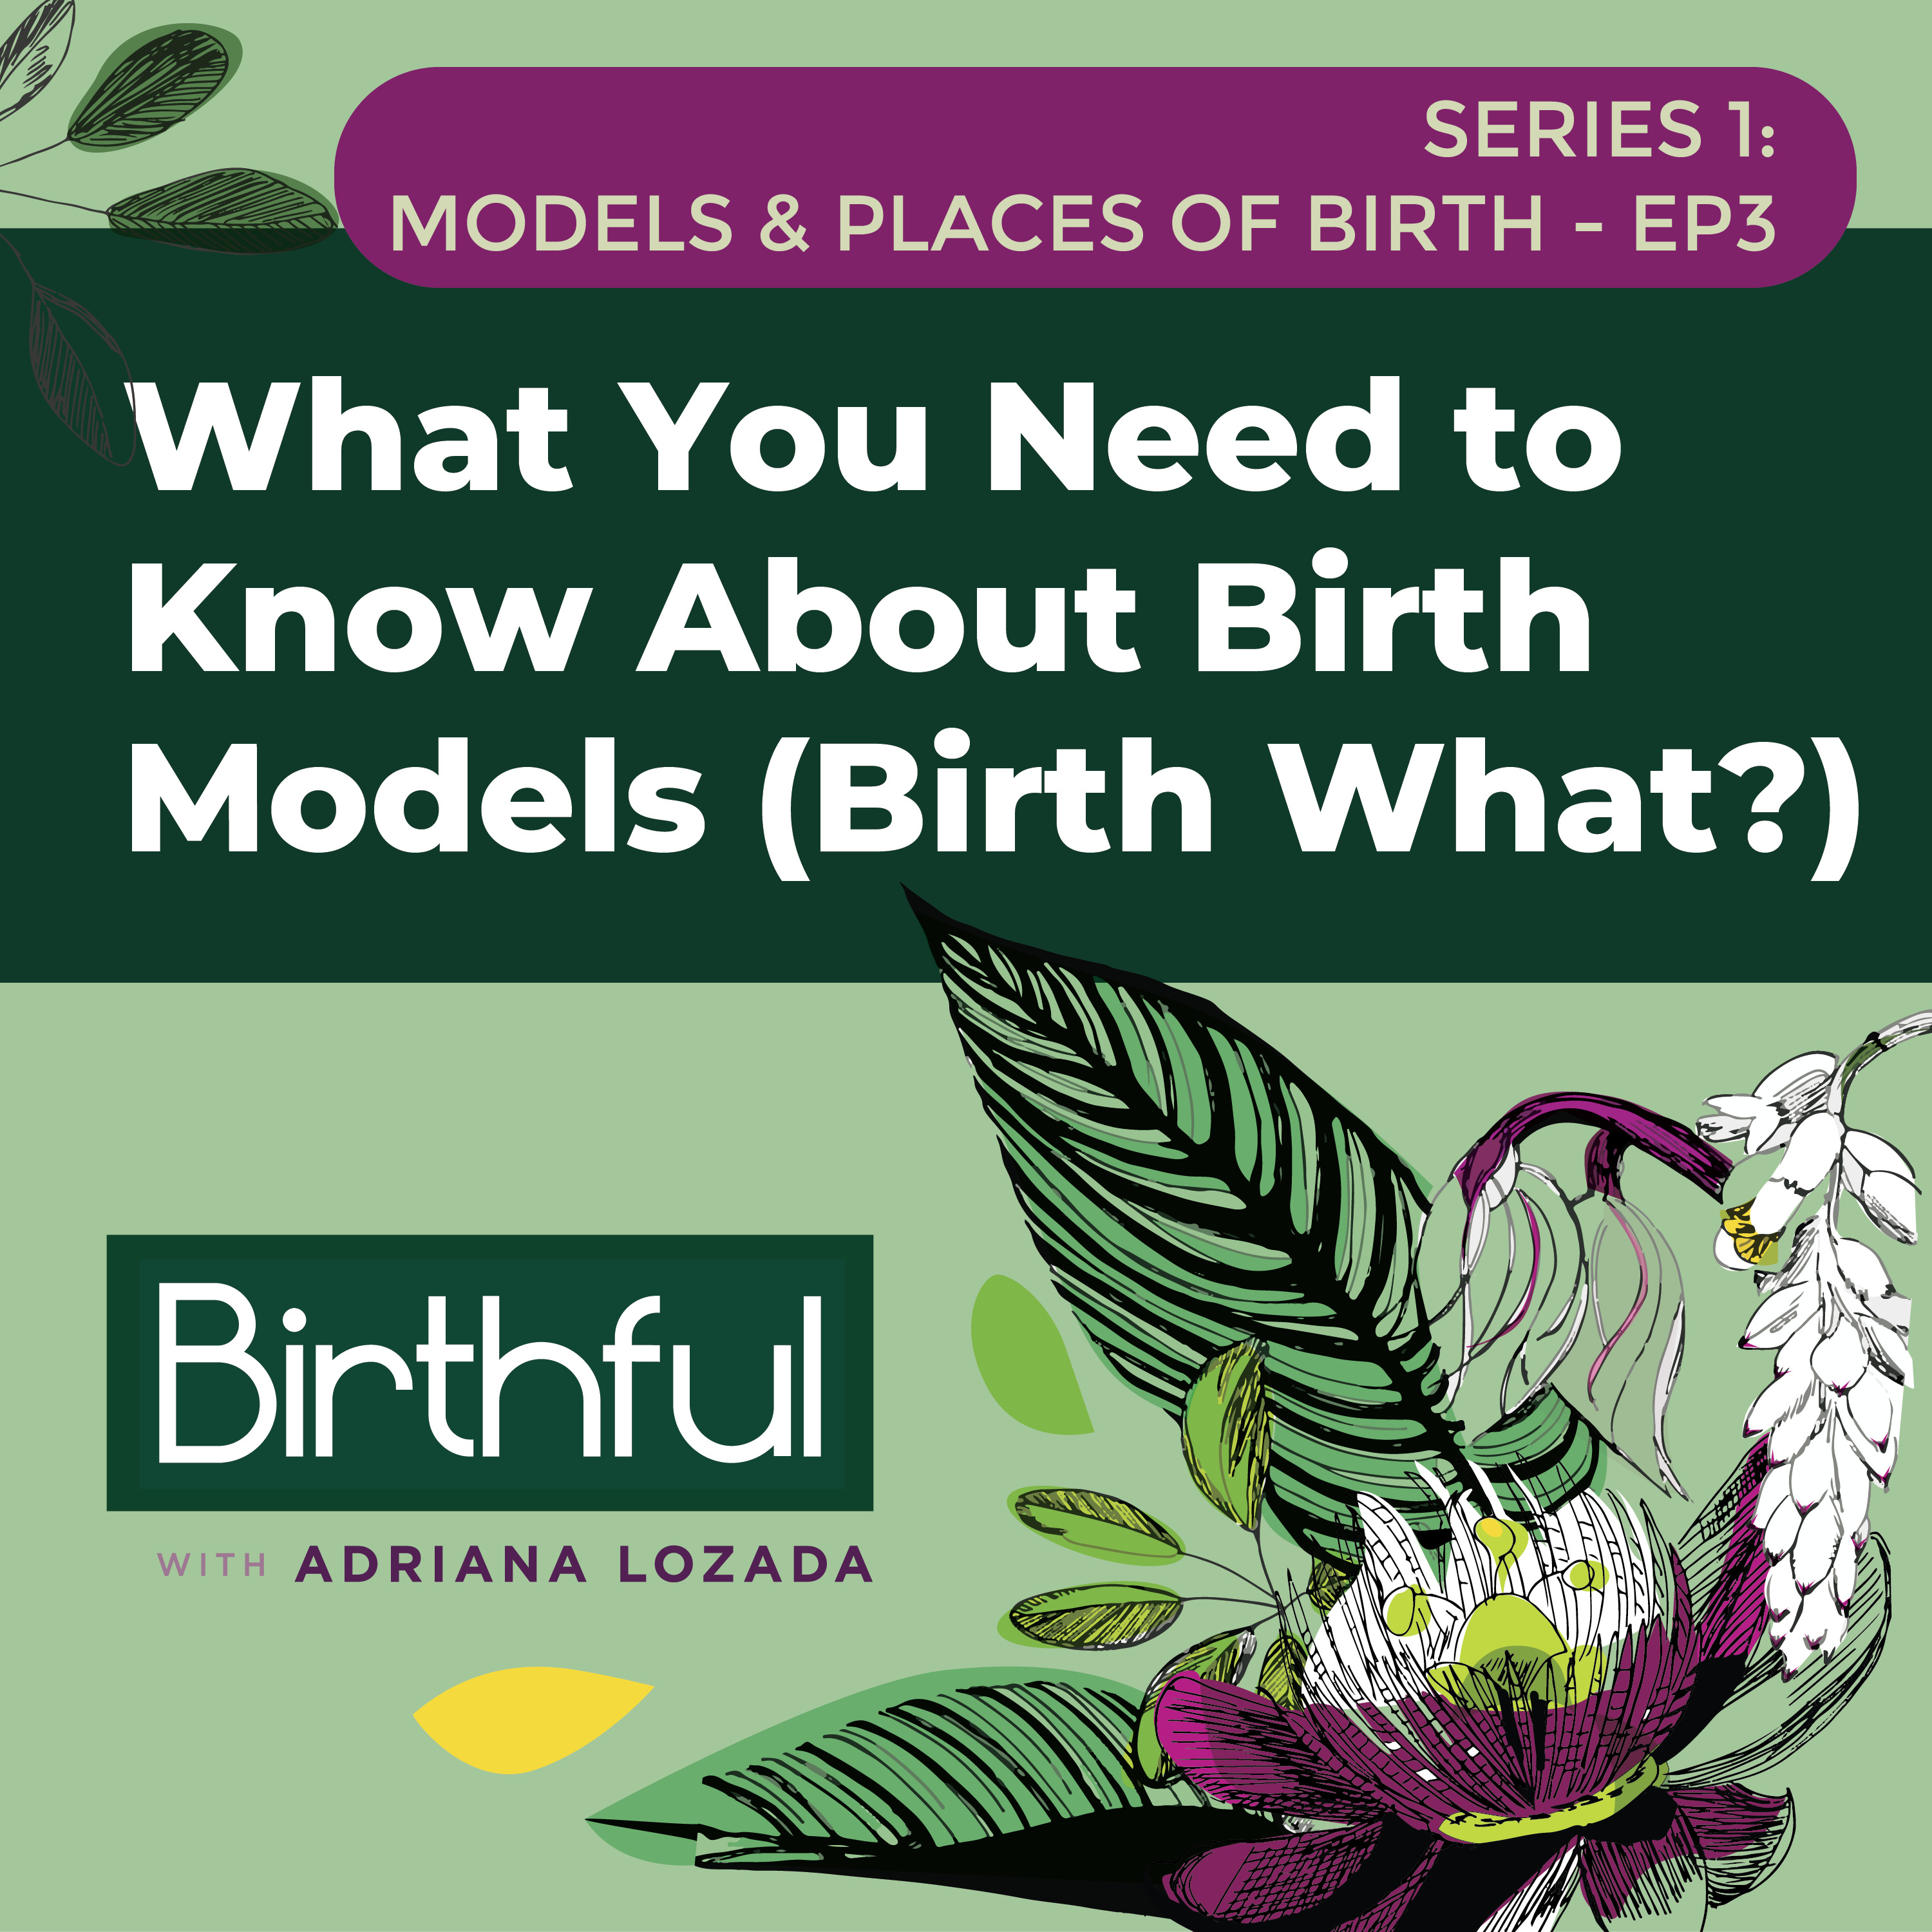 What You Need to Know About Birth Models (Birth What?)